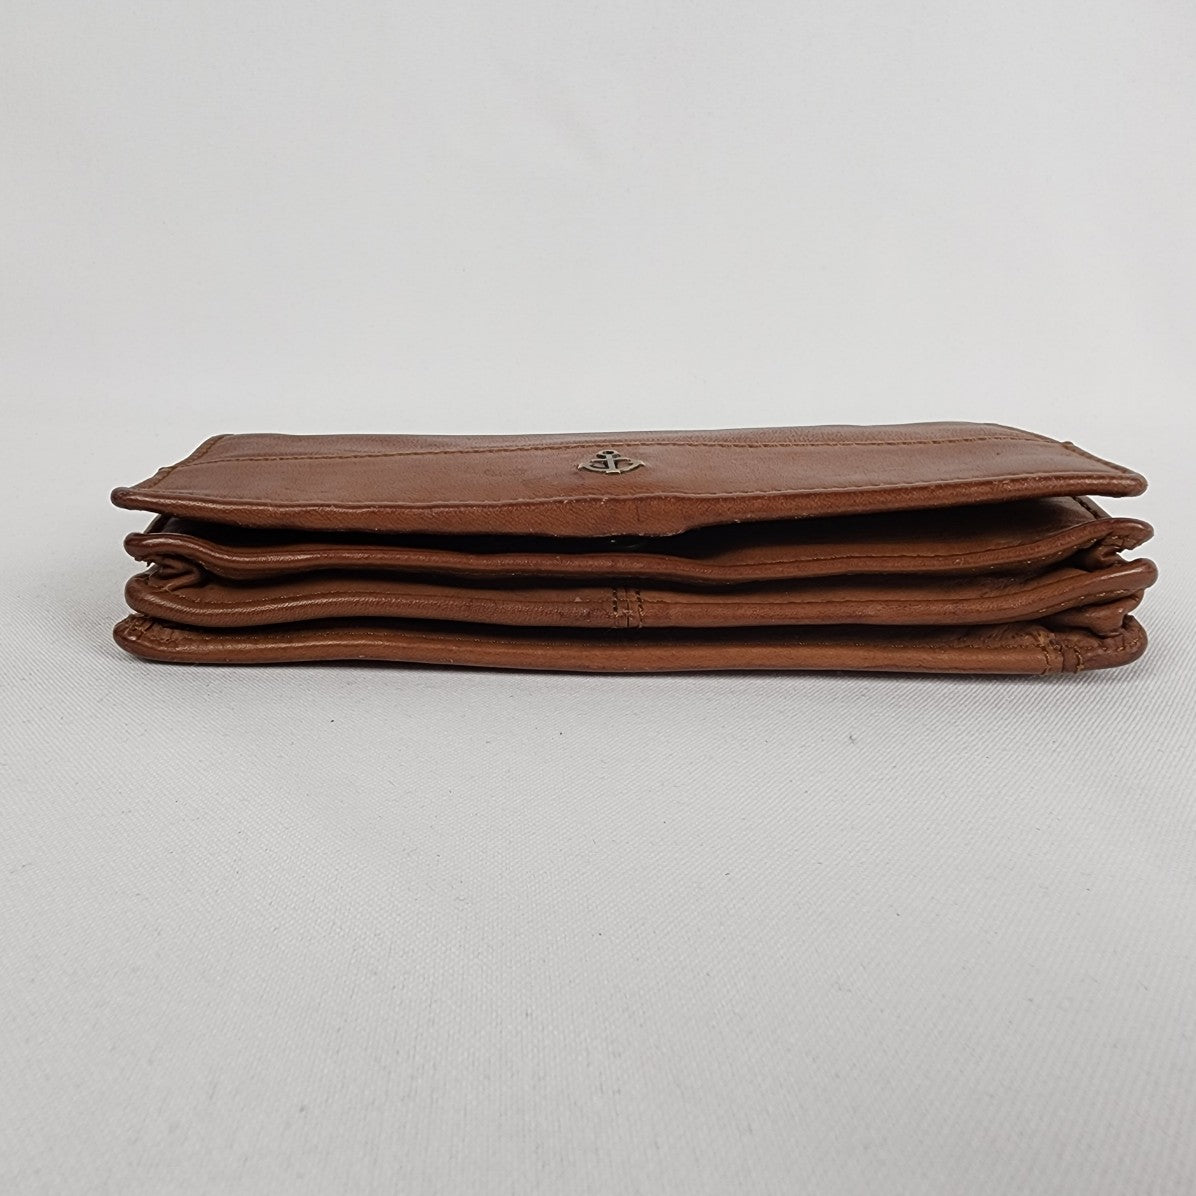 Harbour 2nd Brown Leather Wallet